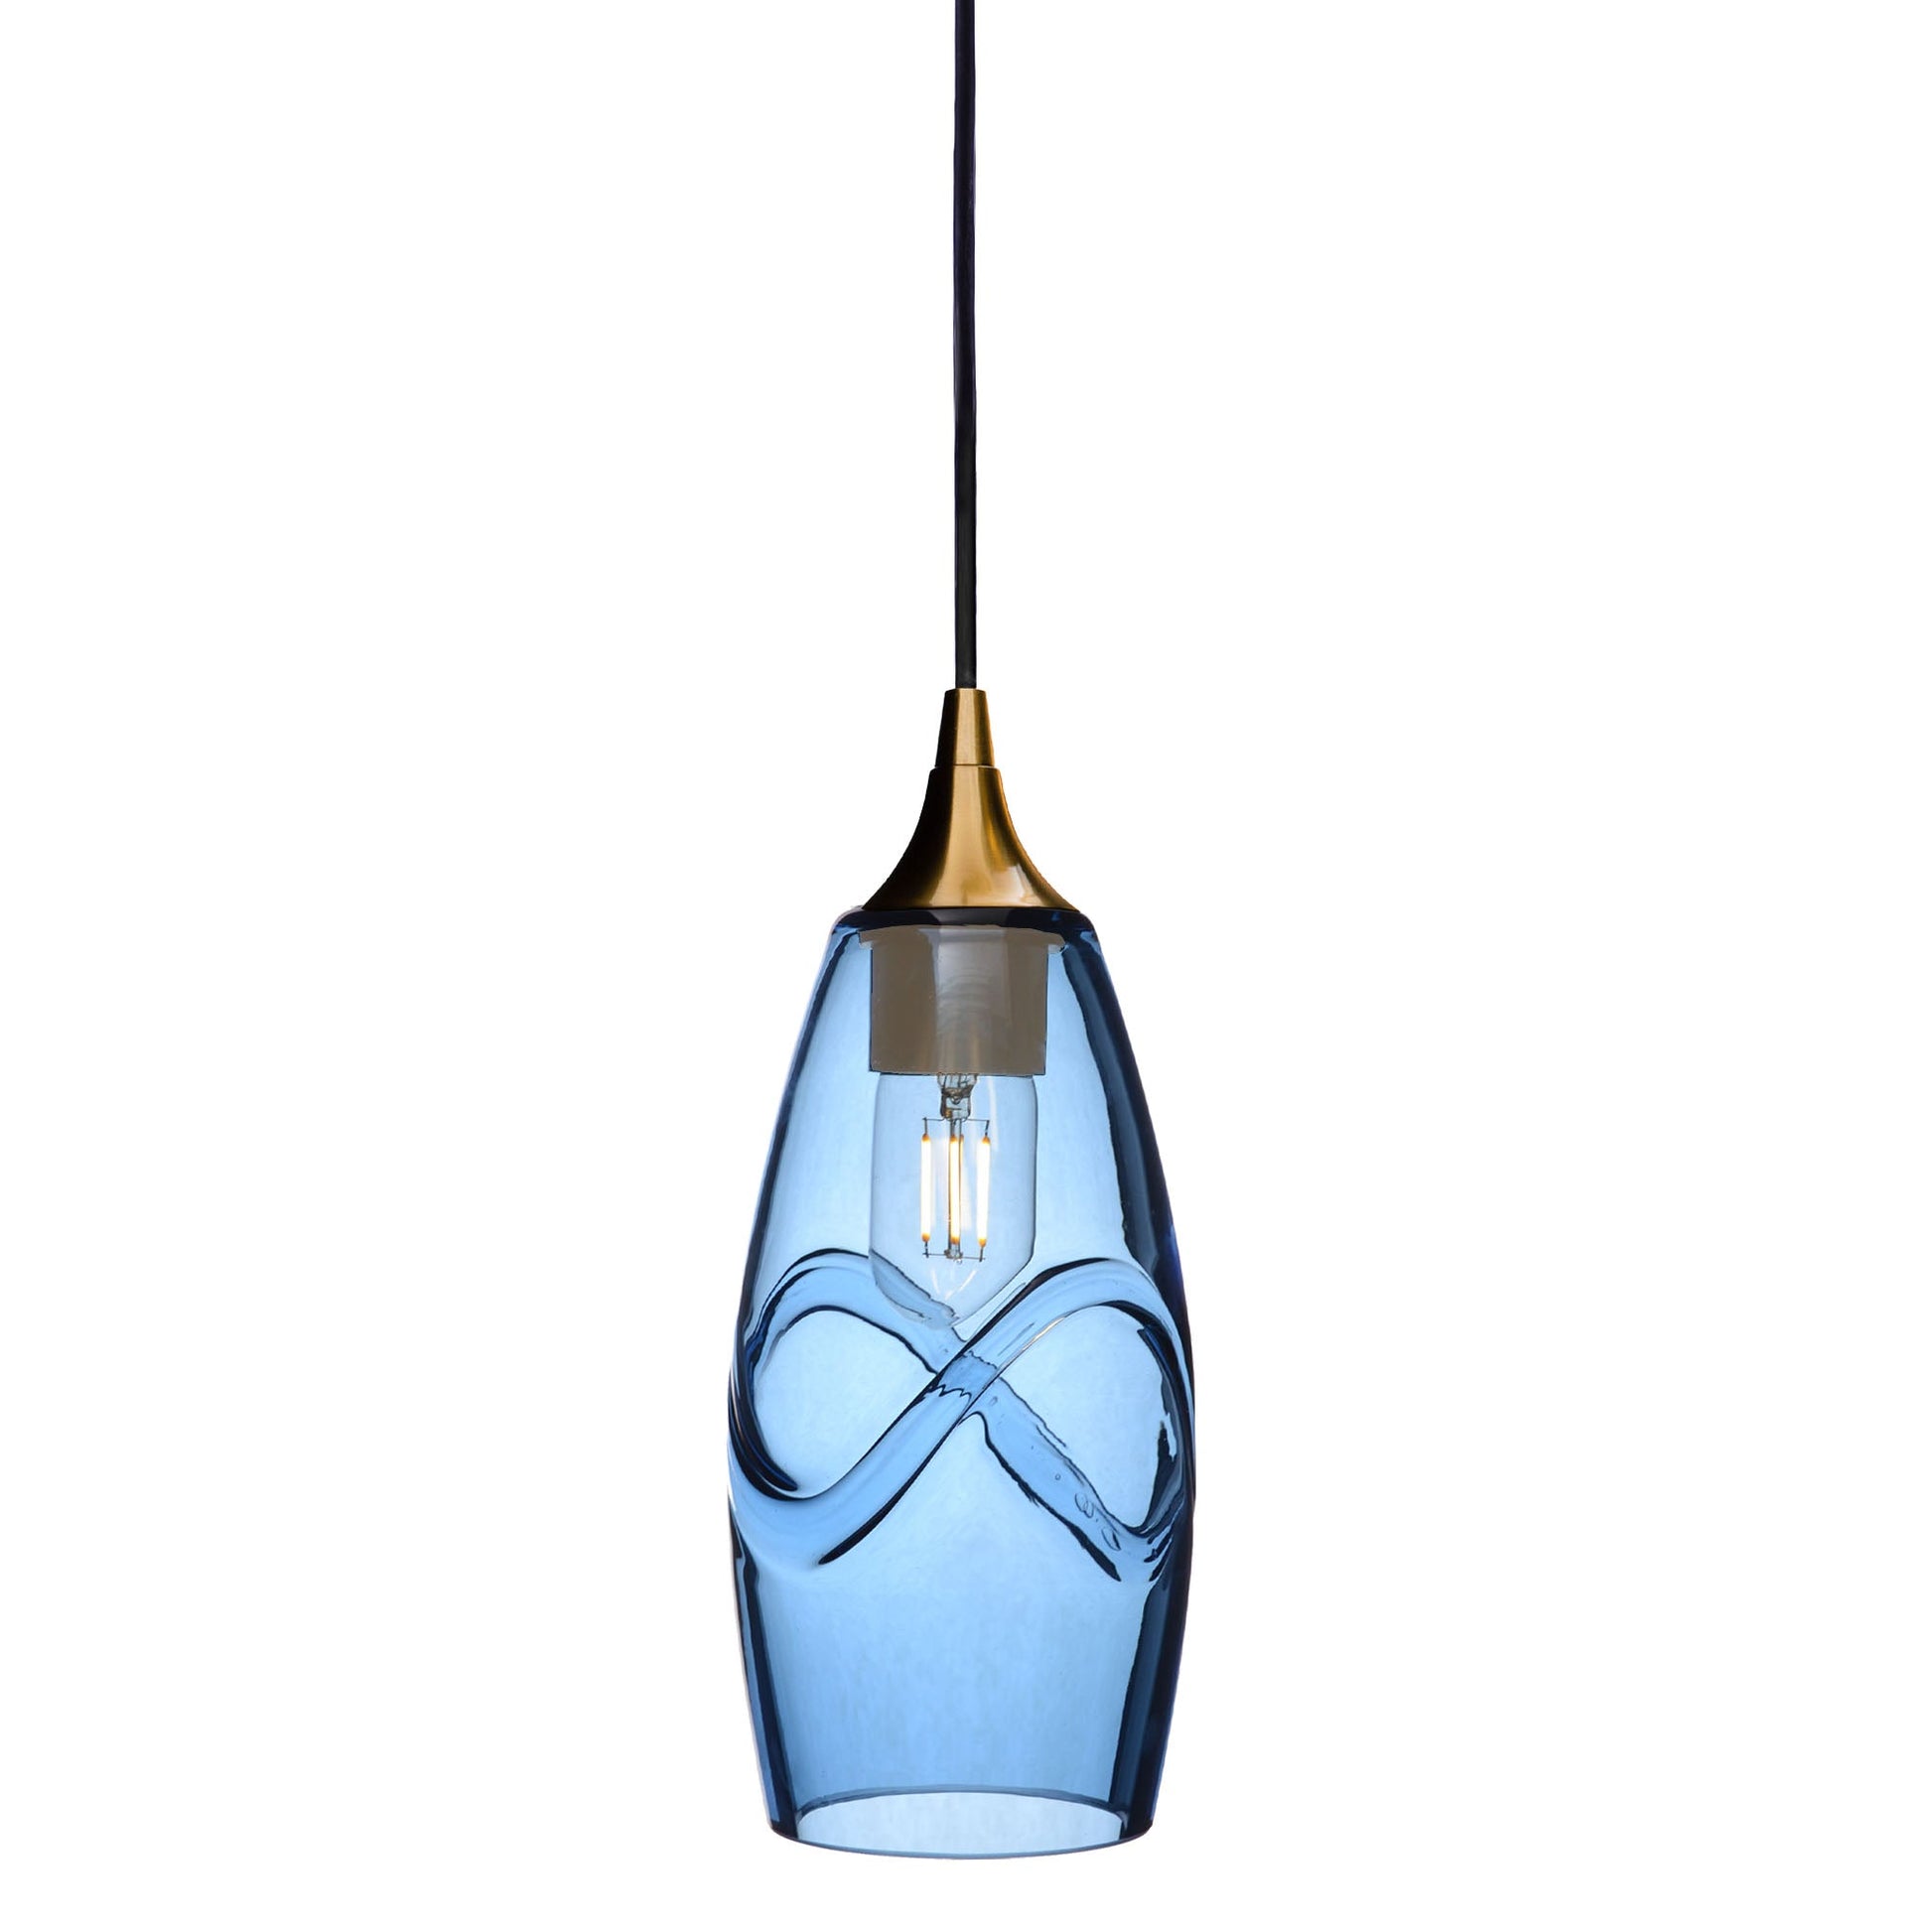 147 Swell: Single Pendant Light-Glass-Bicycle Glass Co - Hotshop-Steel Blue-Polished Brass-Bicycle Glass Co